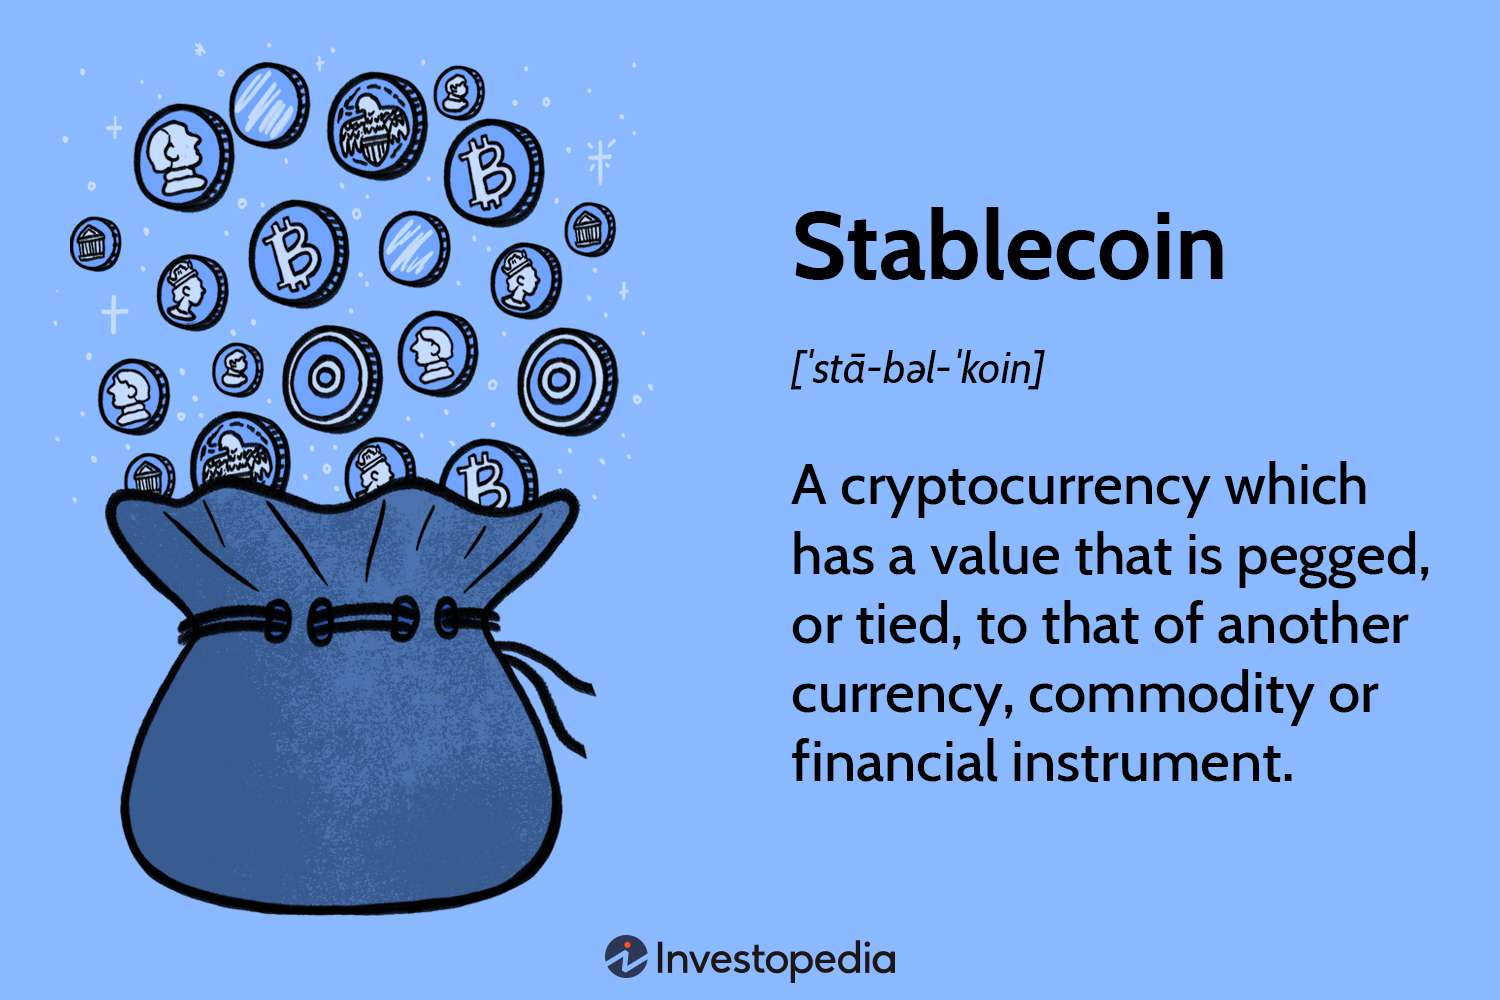 Stablecoins: What’s the hype?